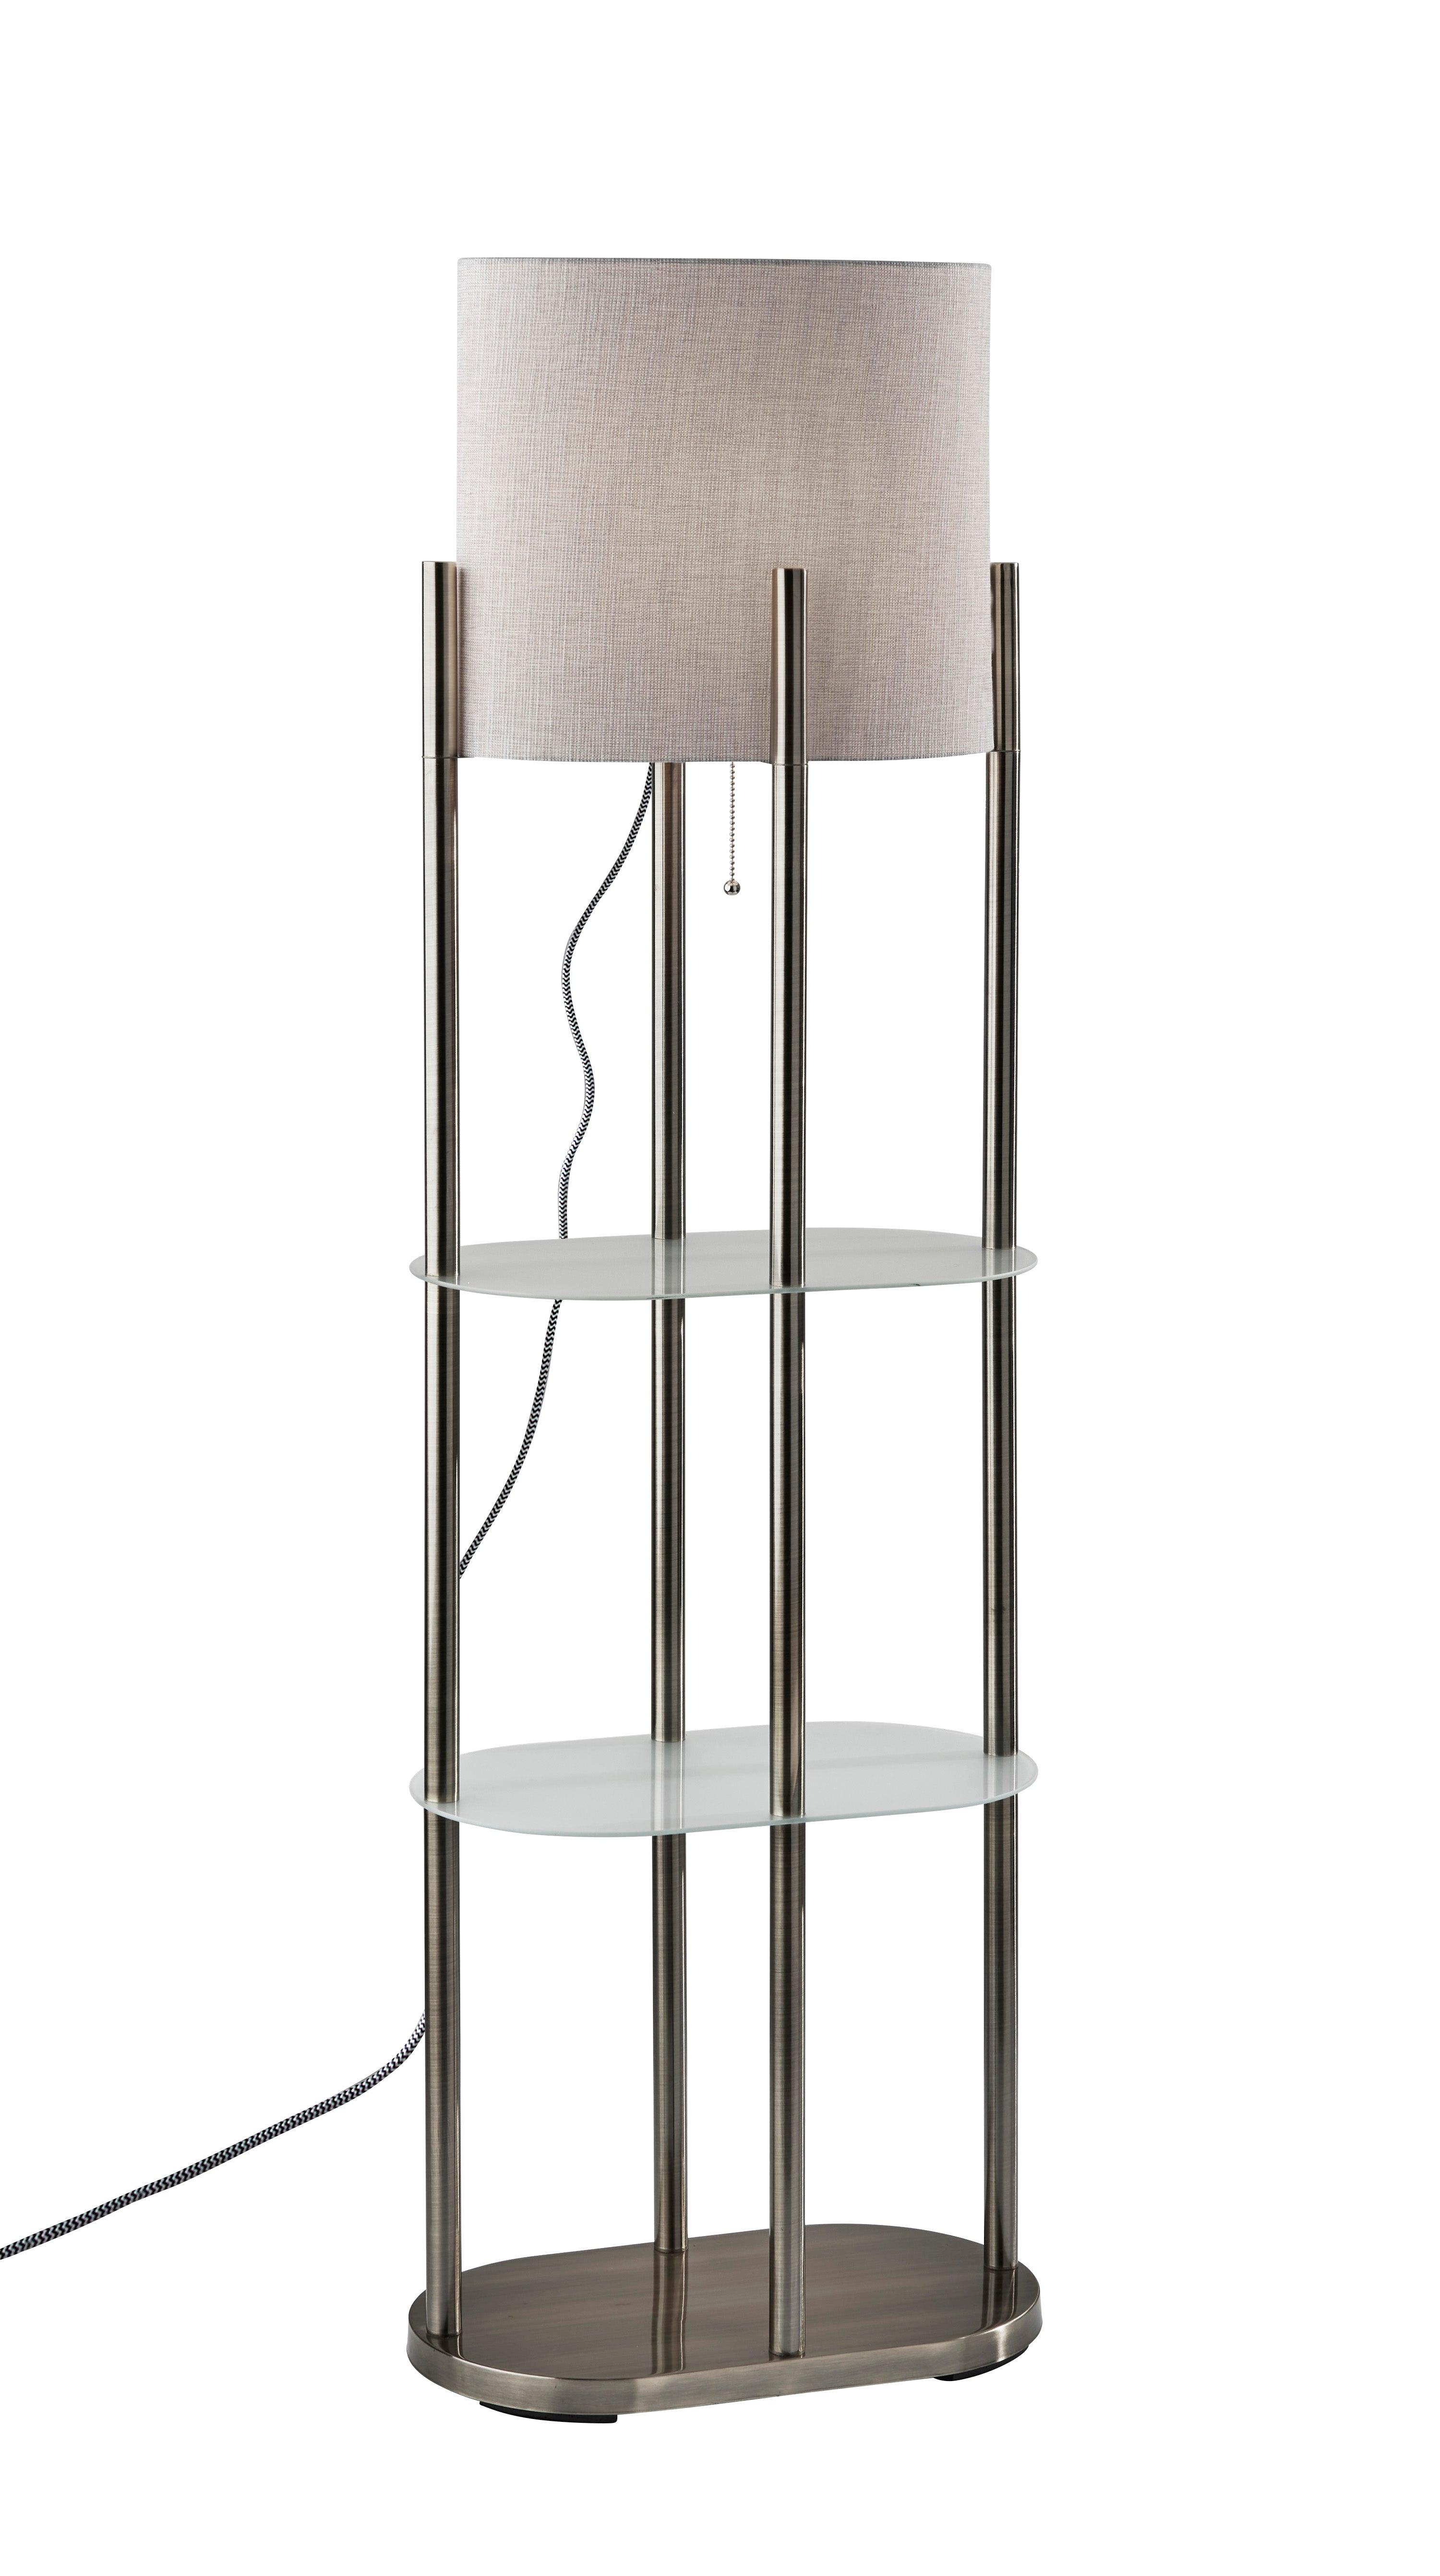 NORMAN Floor lamp Stainless steel - 1518-22 | ADESSO